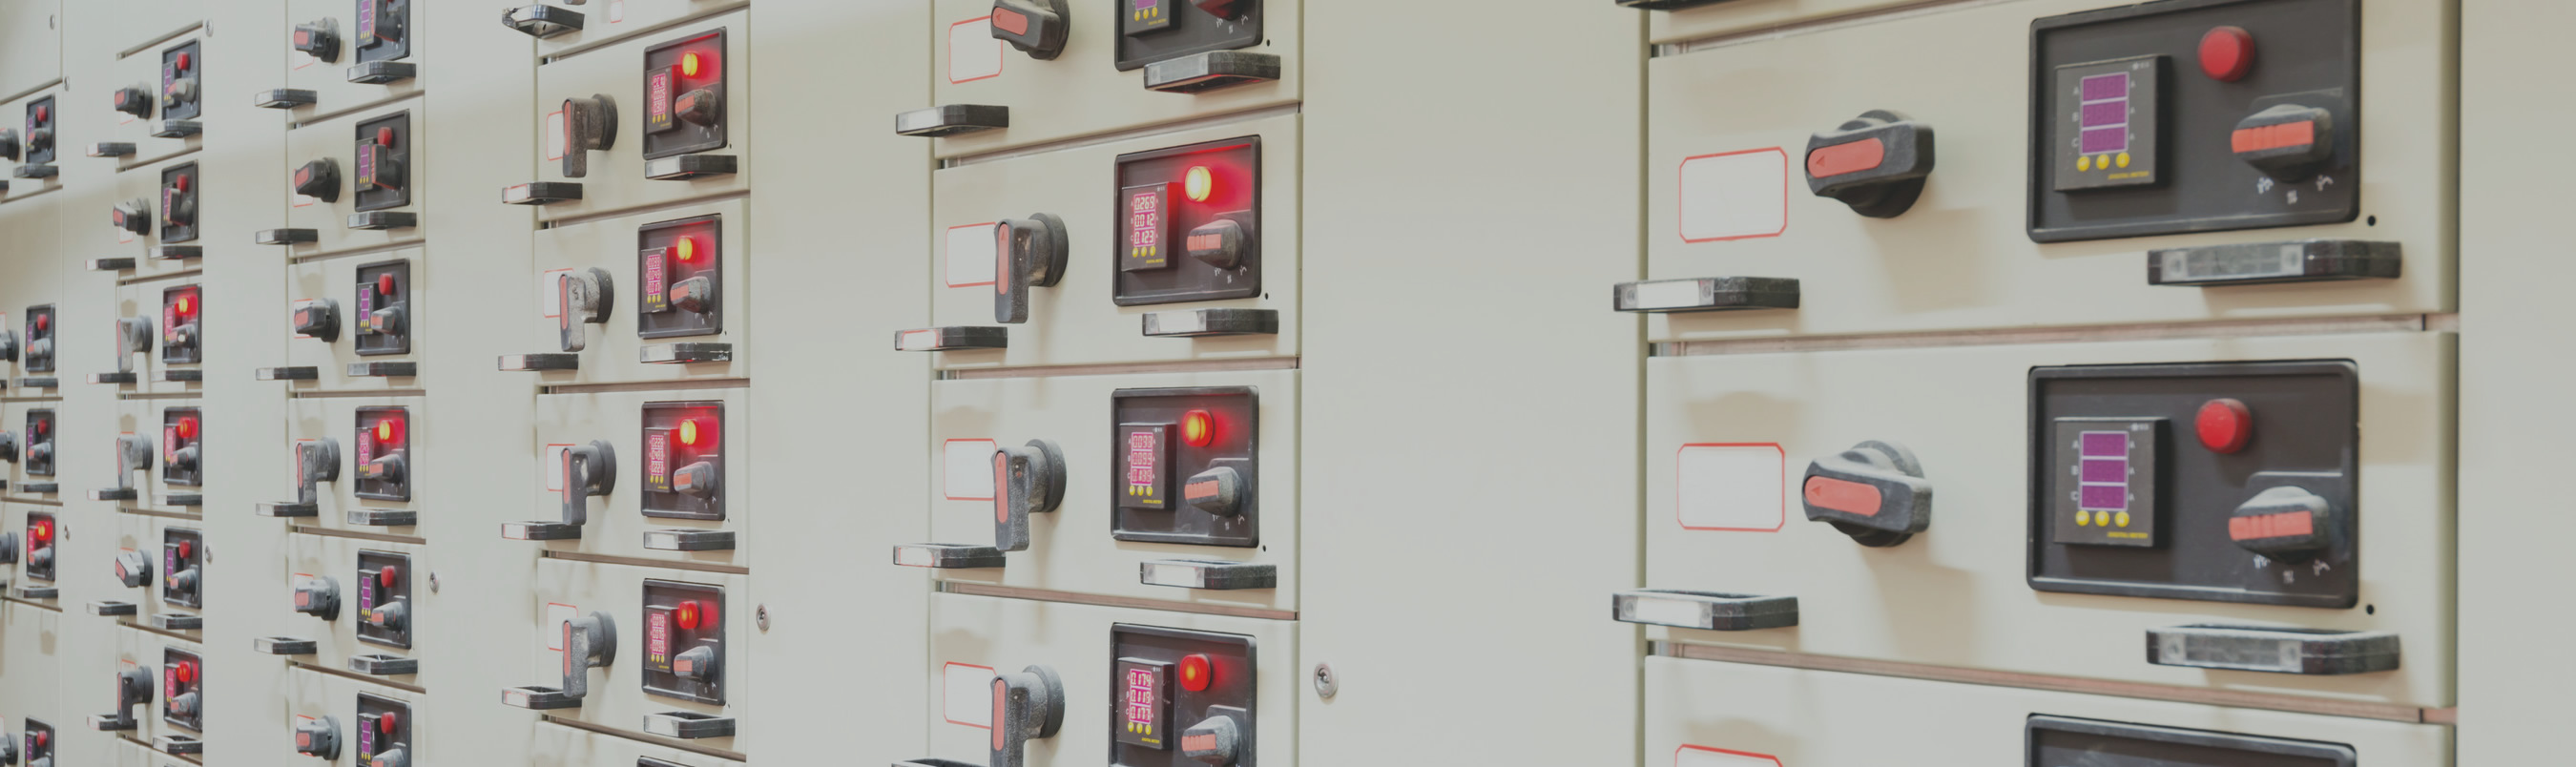 INDUSTRIAL CONTROL PANELS